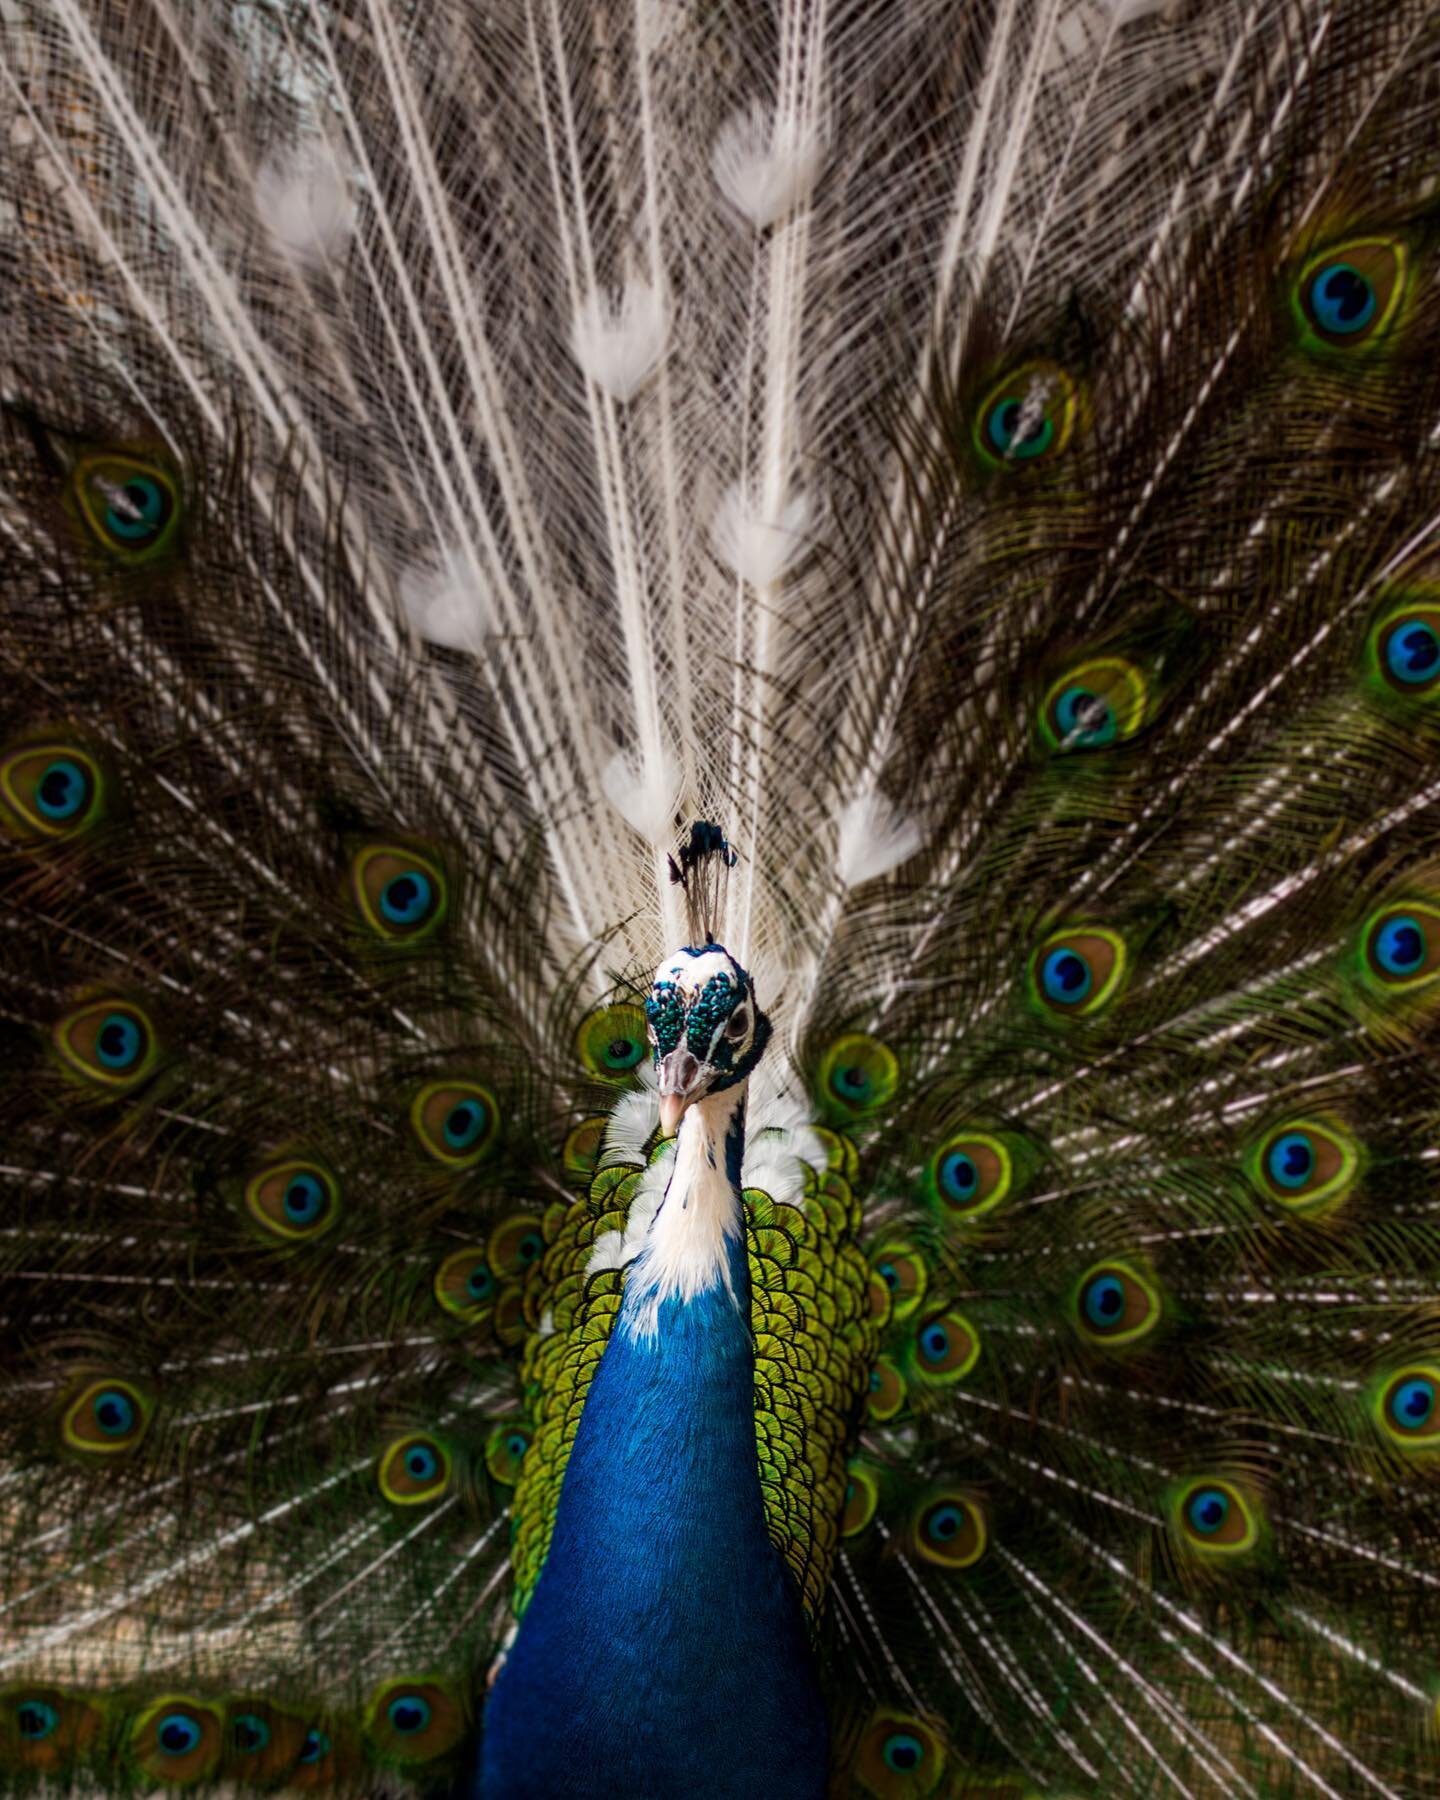 I love peacocks and this one is gorgeous! 😍 I looked up quotes to add to this caption and I really like this one: &ldquo;By being yourself you put something wonderful in the world that was not there before.&rdquo; - Edwin Elliot
&bull;
This peacock 